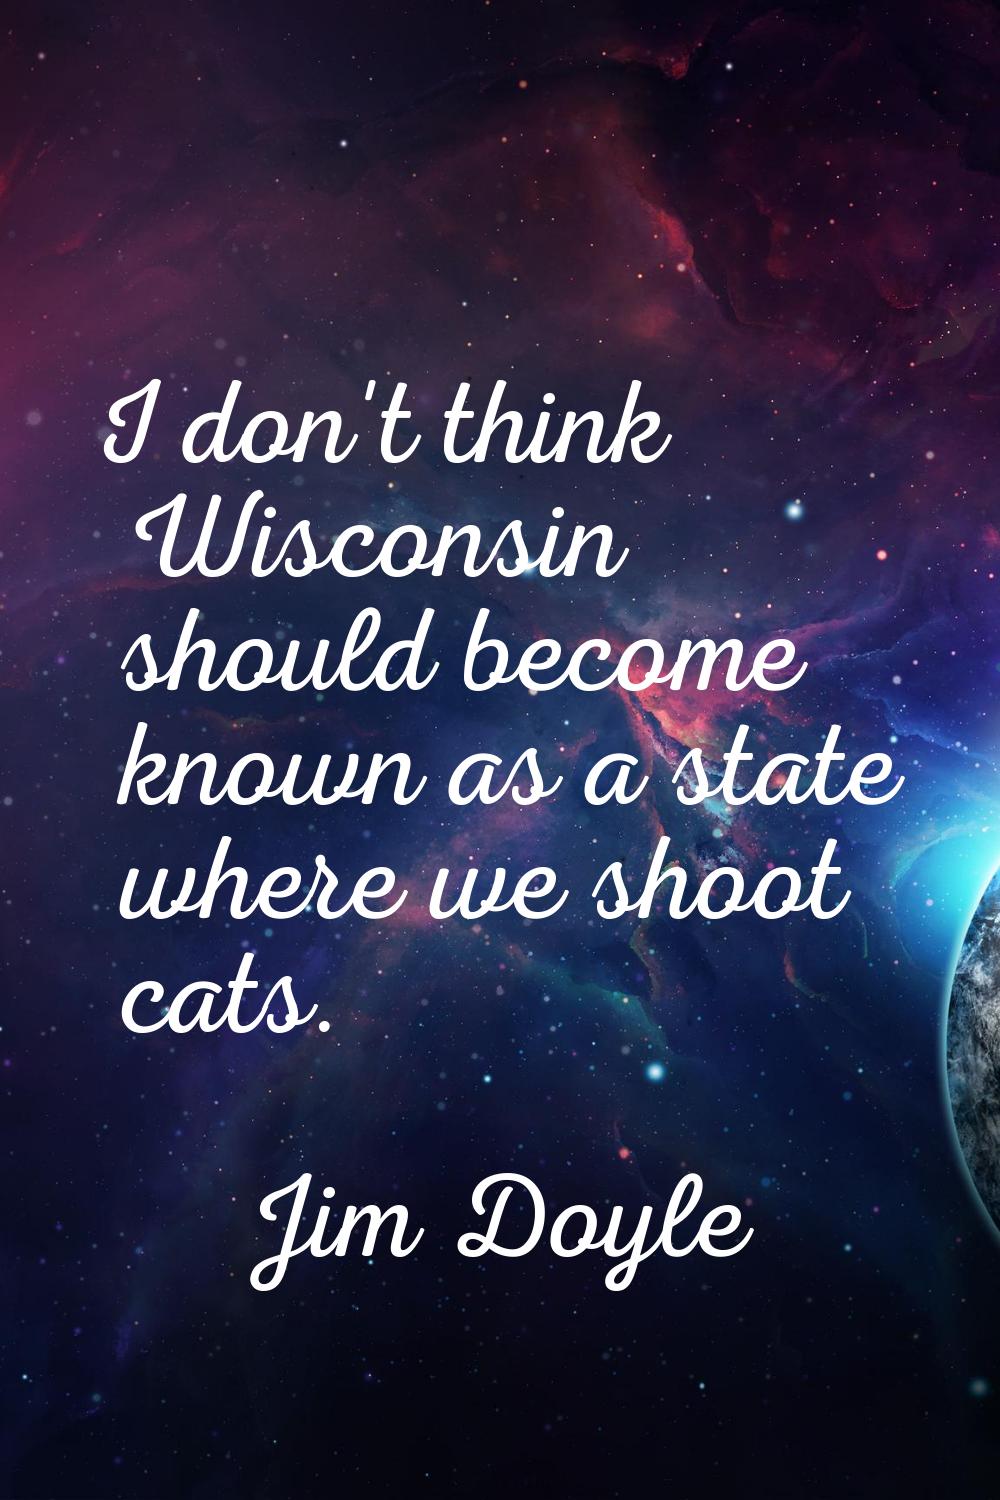 I don't think Wisconsin should become known as a state where we shoot cats.